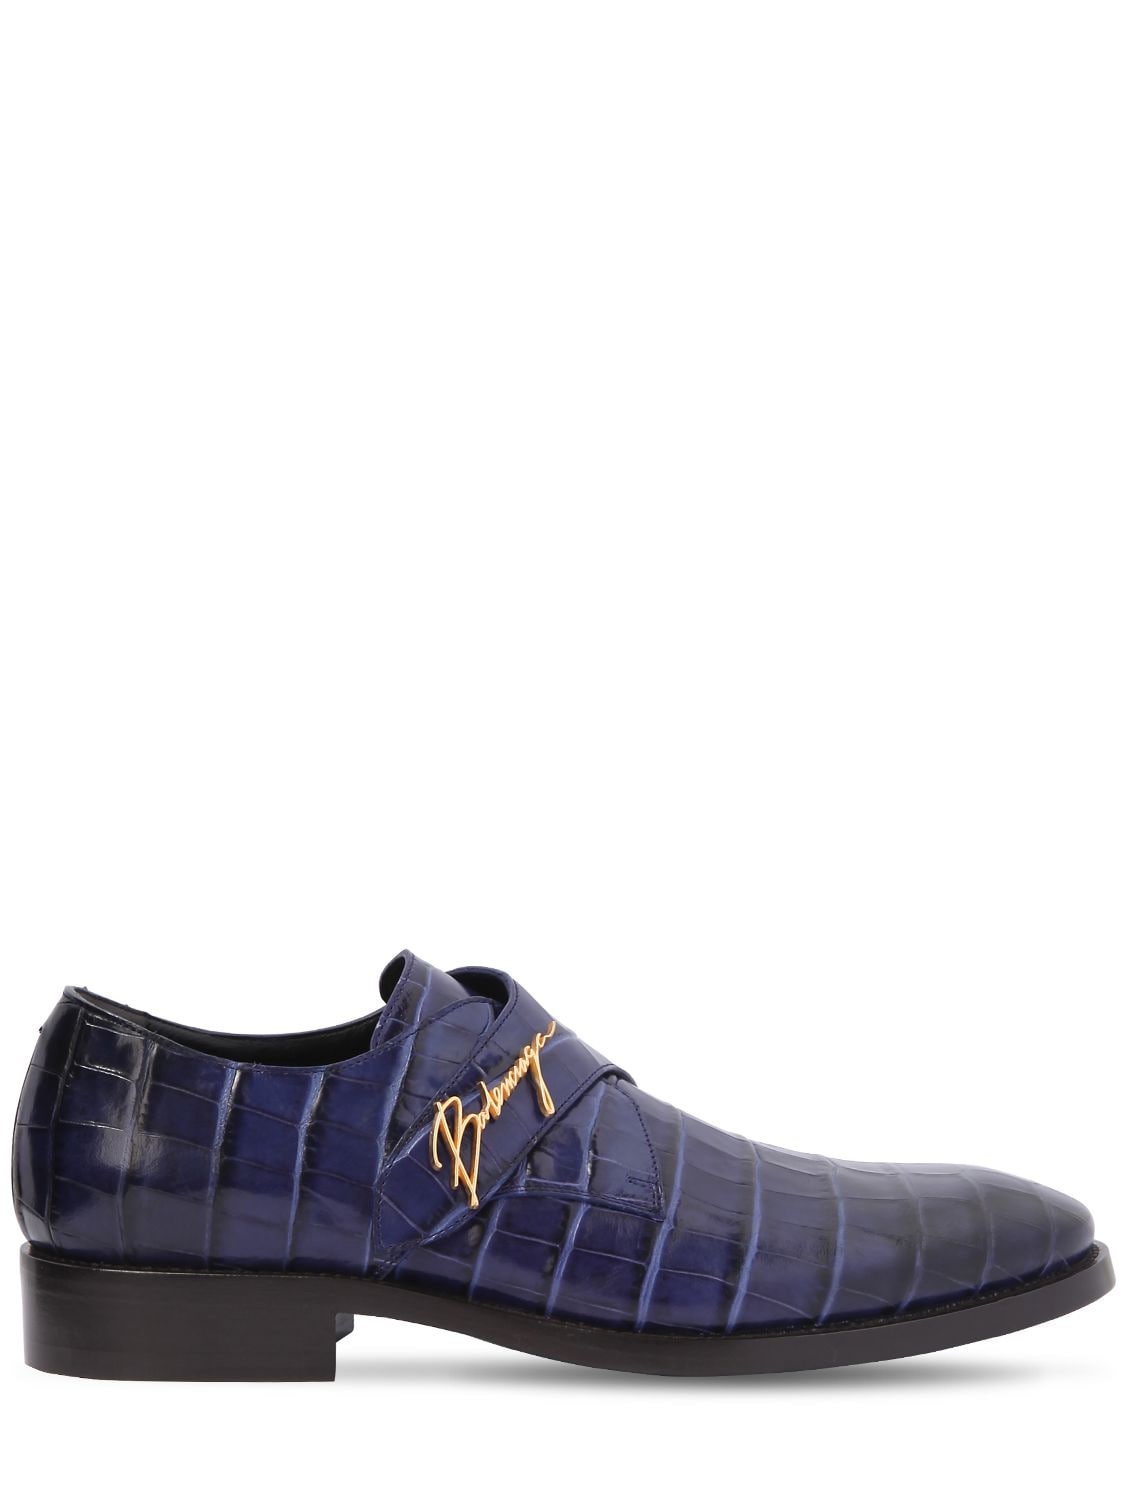 Balenciaga Croc Embossed Leather Slip-on Shoes In Blue